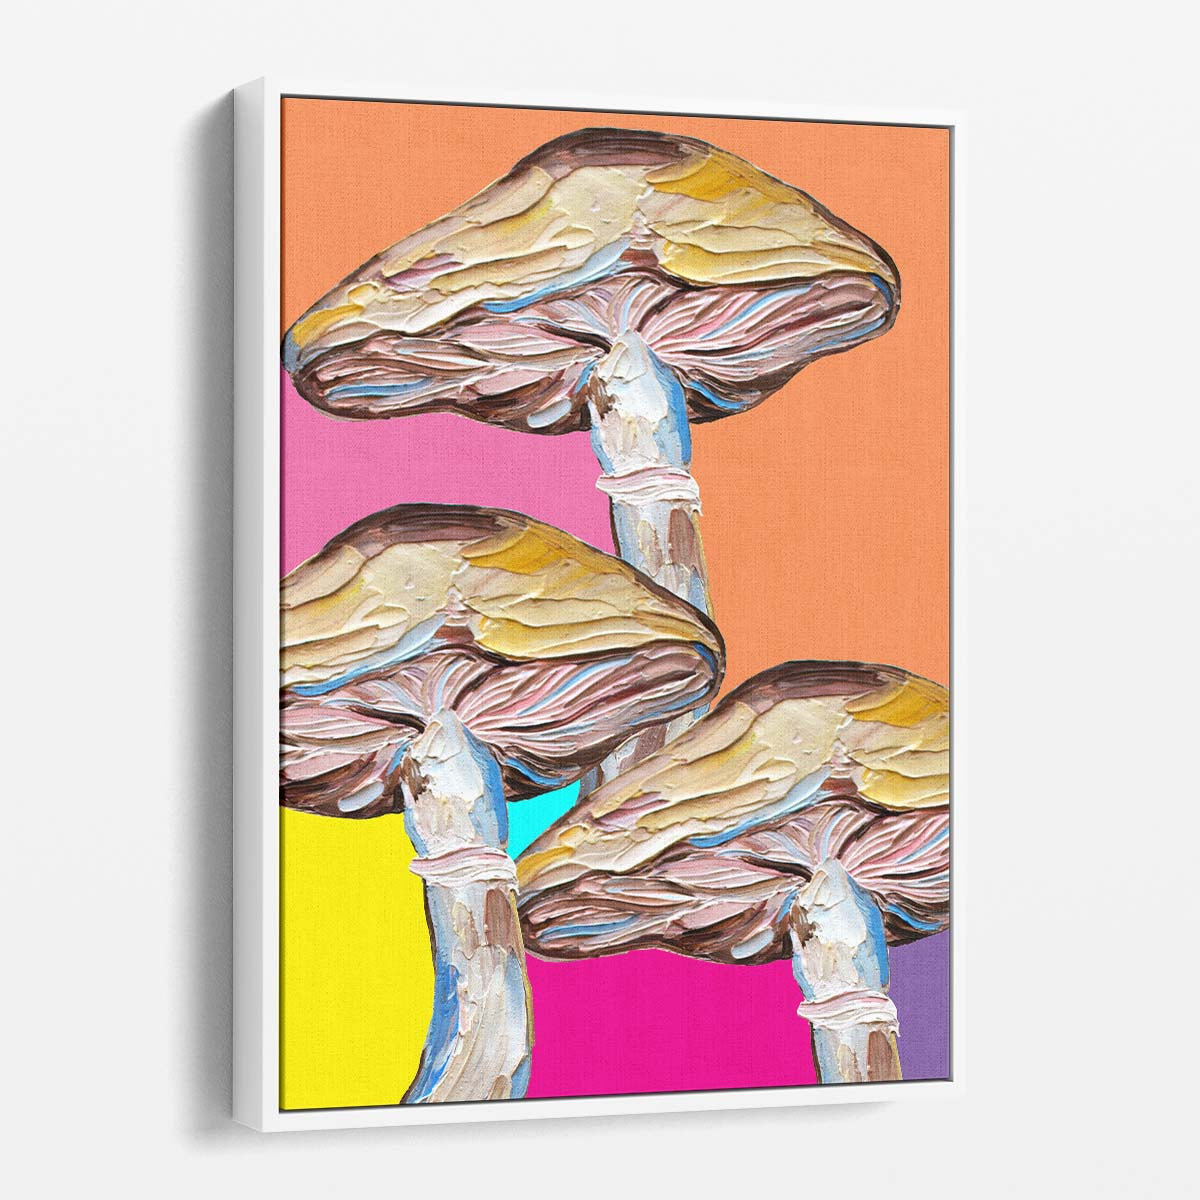 Psychedelic Mushrooms Illustration, Colourful Macro Fungi Wall Art by Luxuriance Designs, made in USA